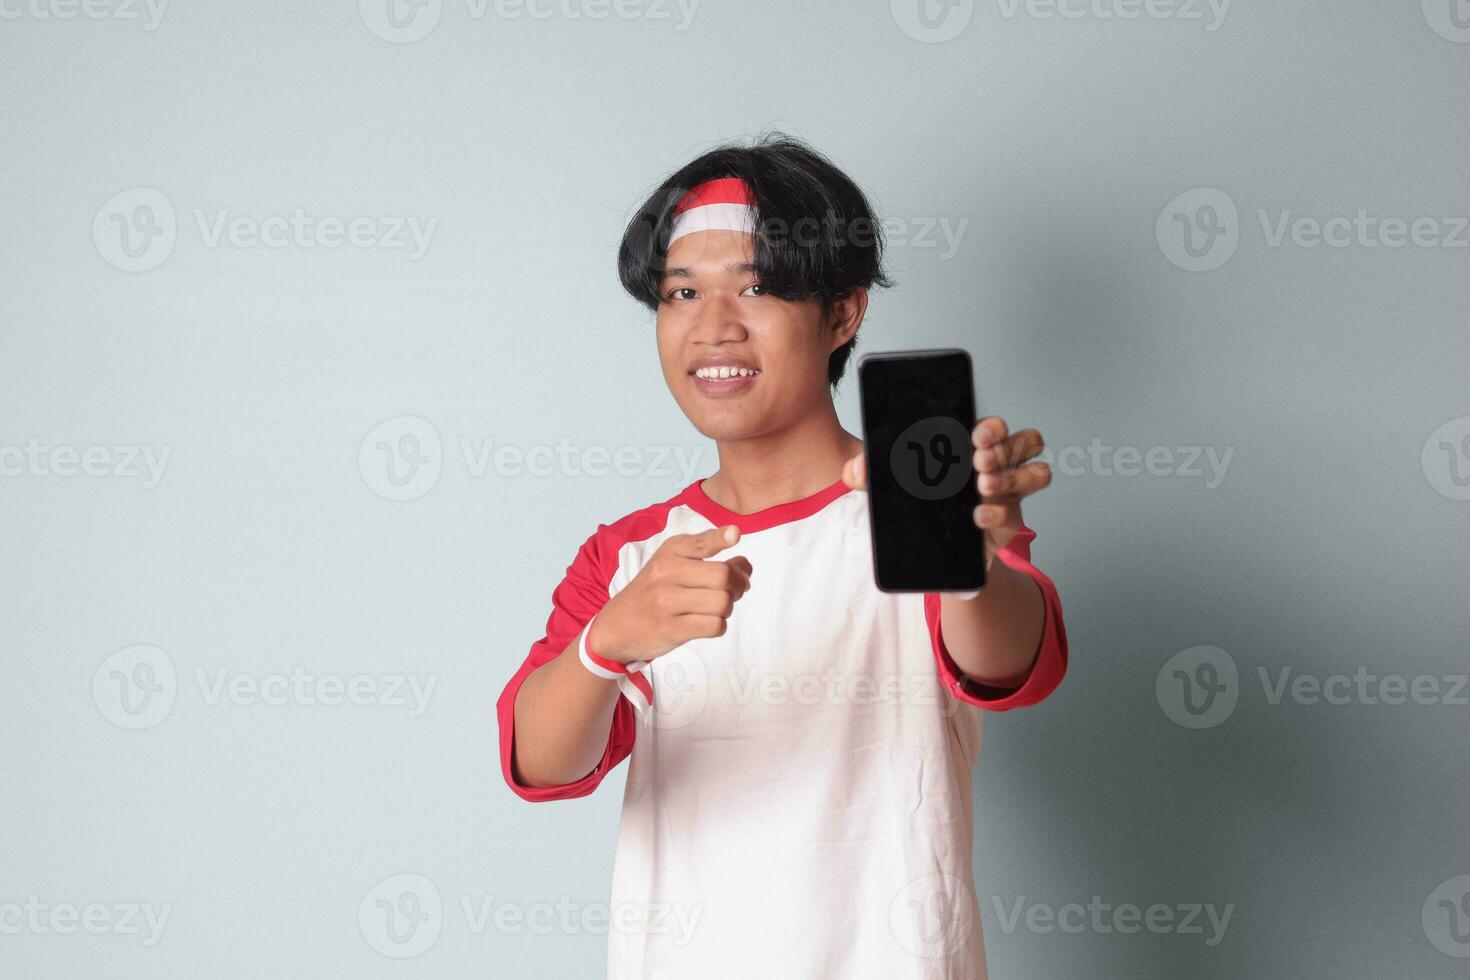 Portrait of attractive Asian man in t-shirt with red and white ribbon on head, holding and showing blank screen of mobile phone for mock-up. Isolated image on gray background photo